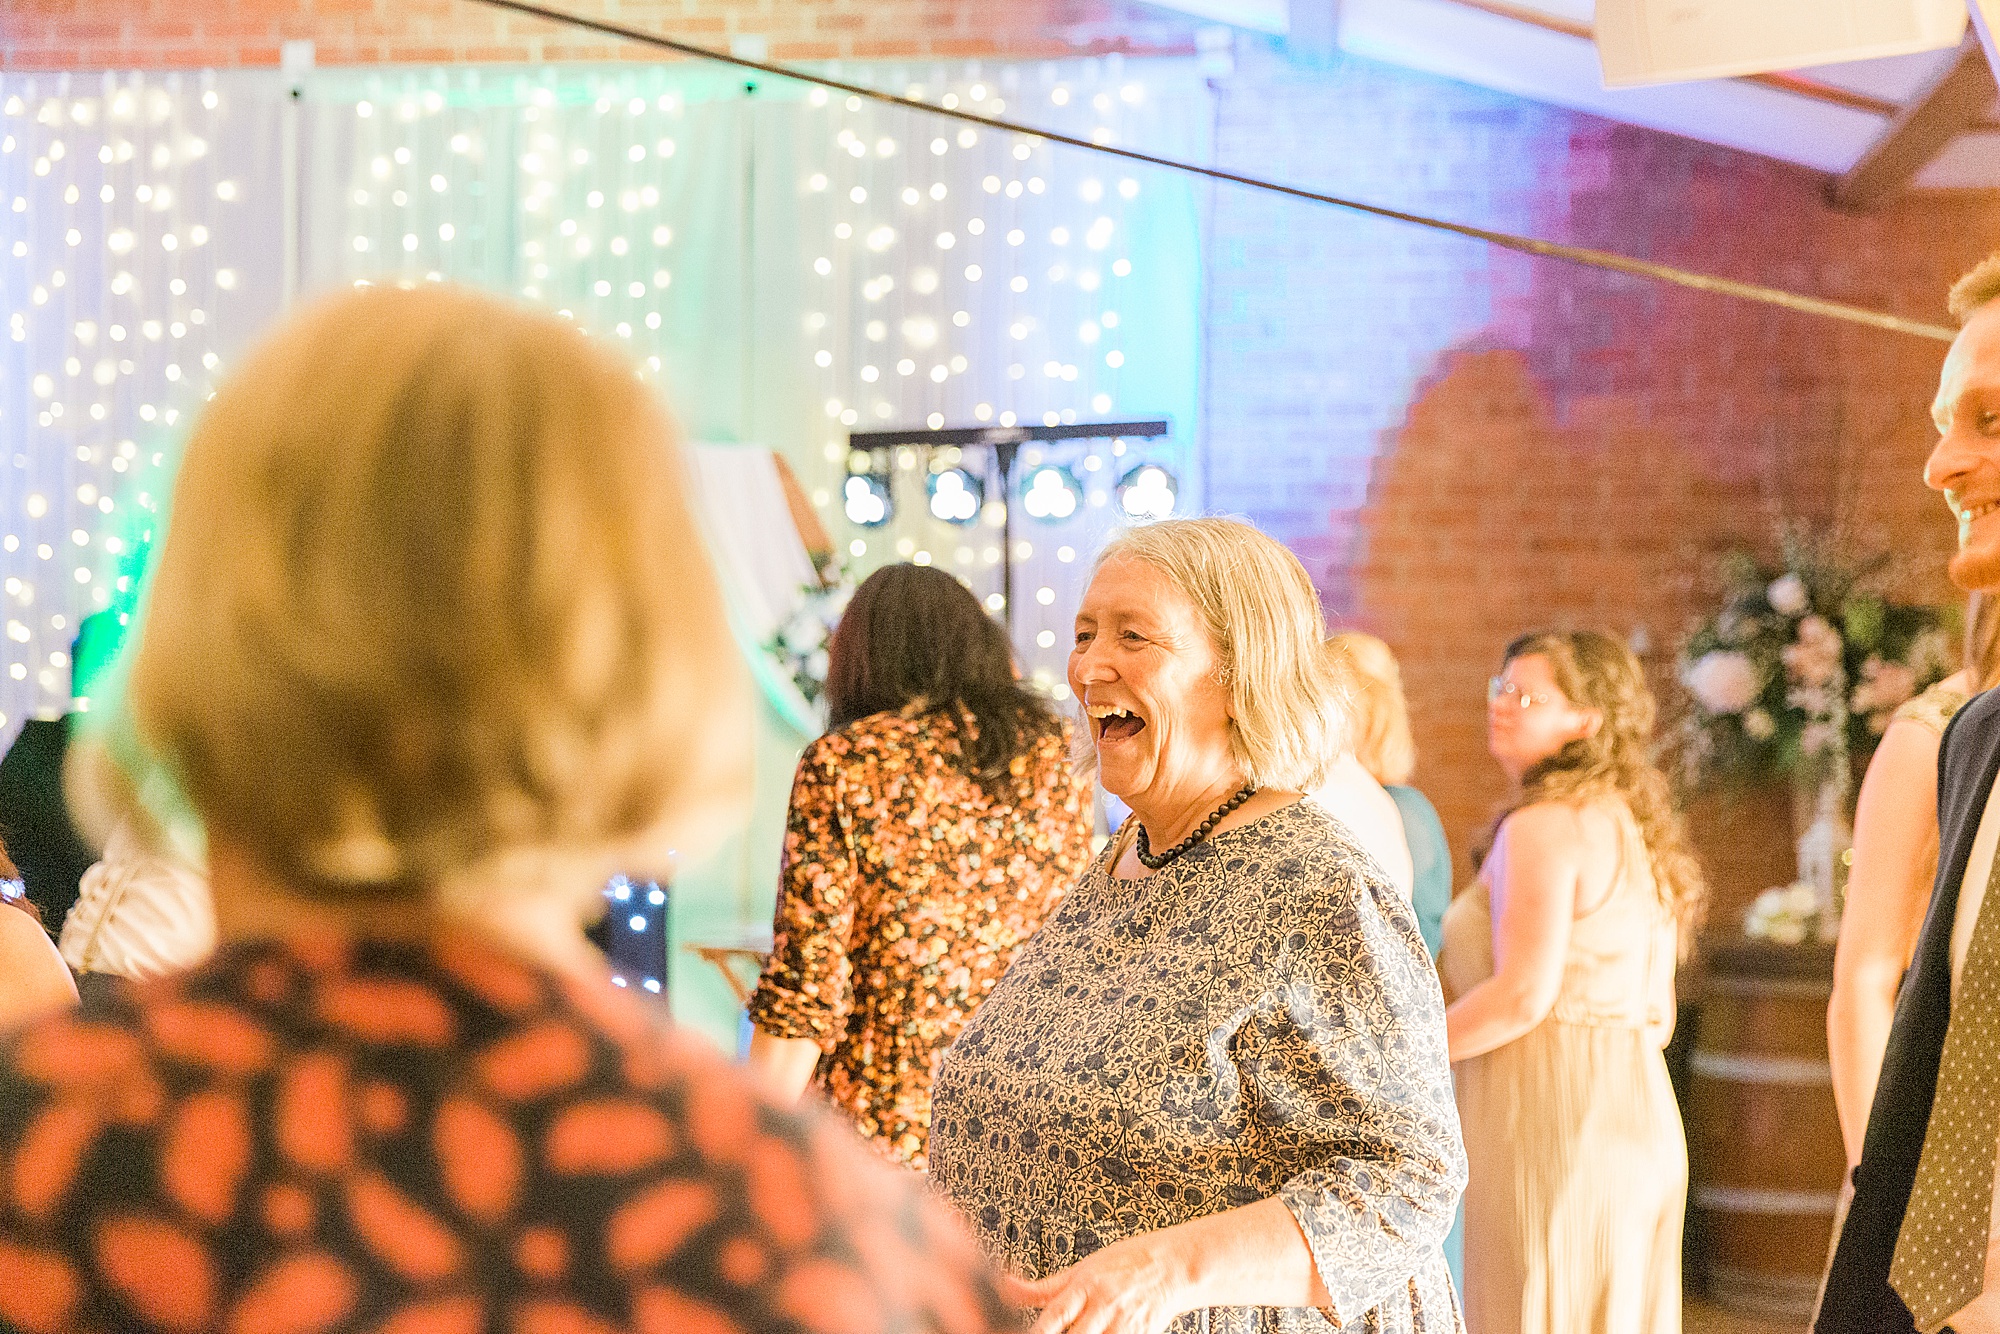 image shows guests dancing and singing at a wedding reception in the evening, 